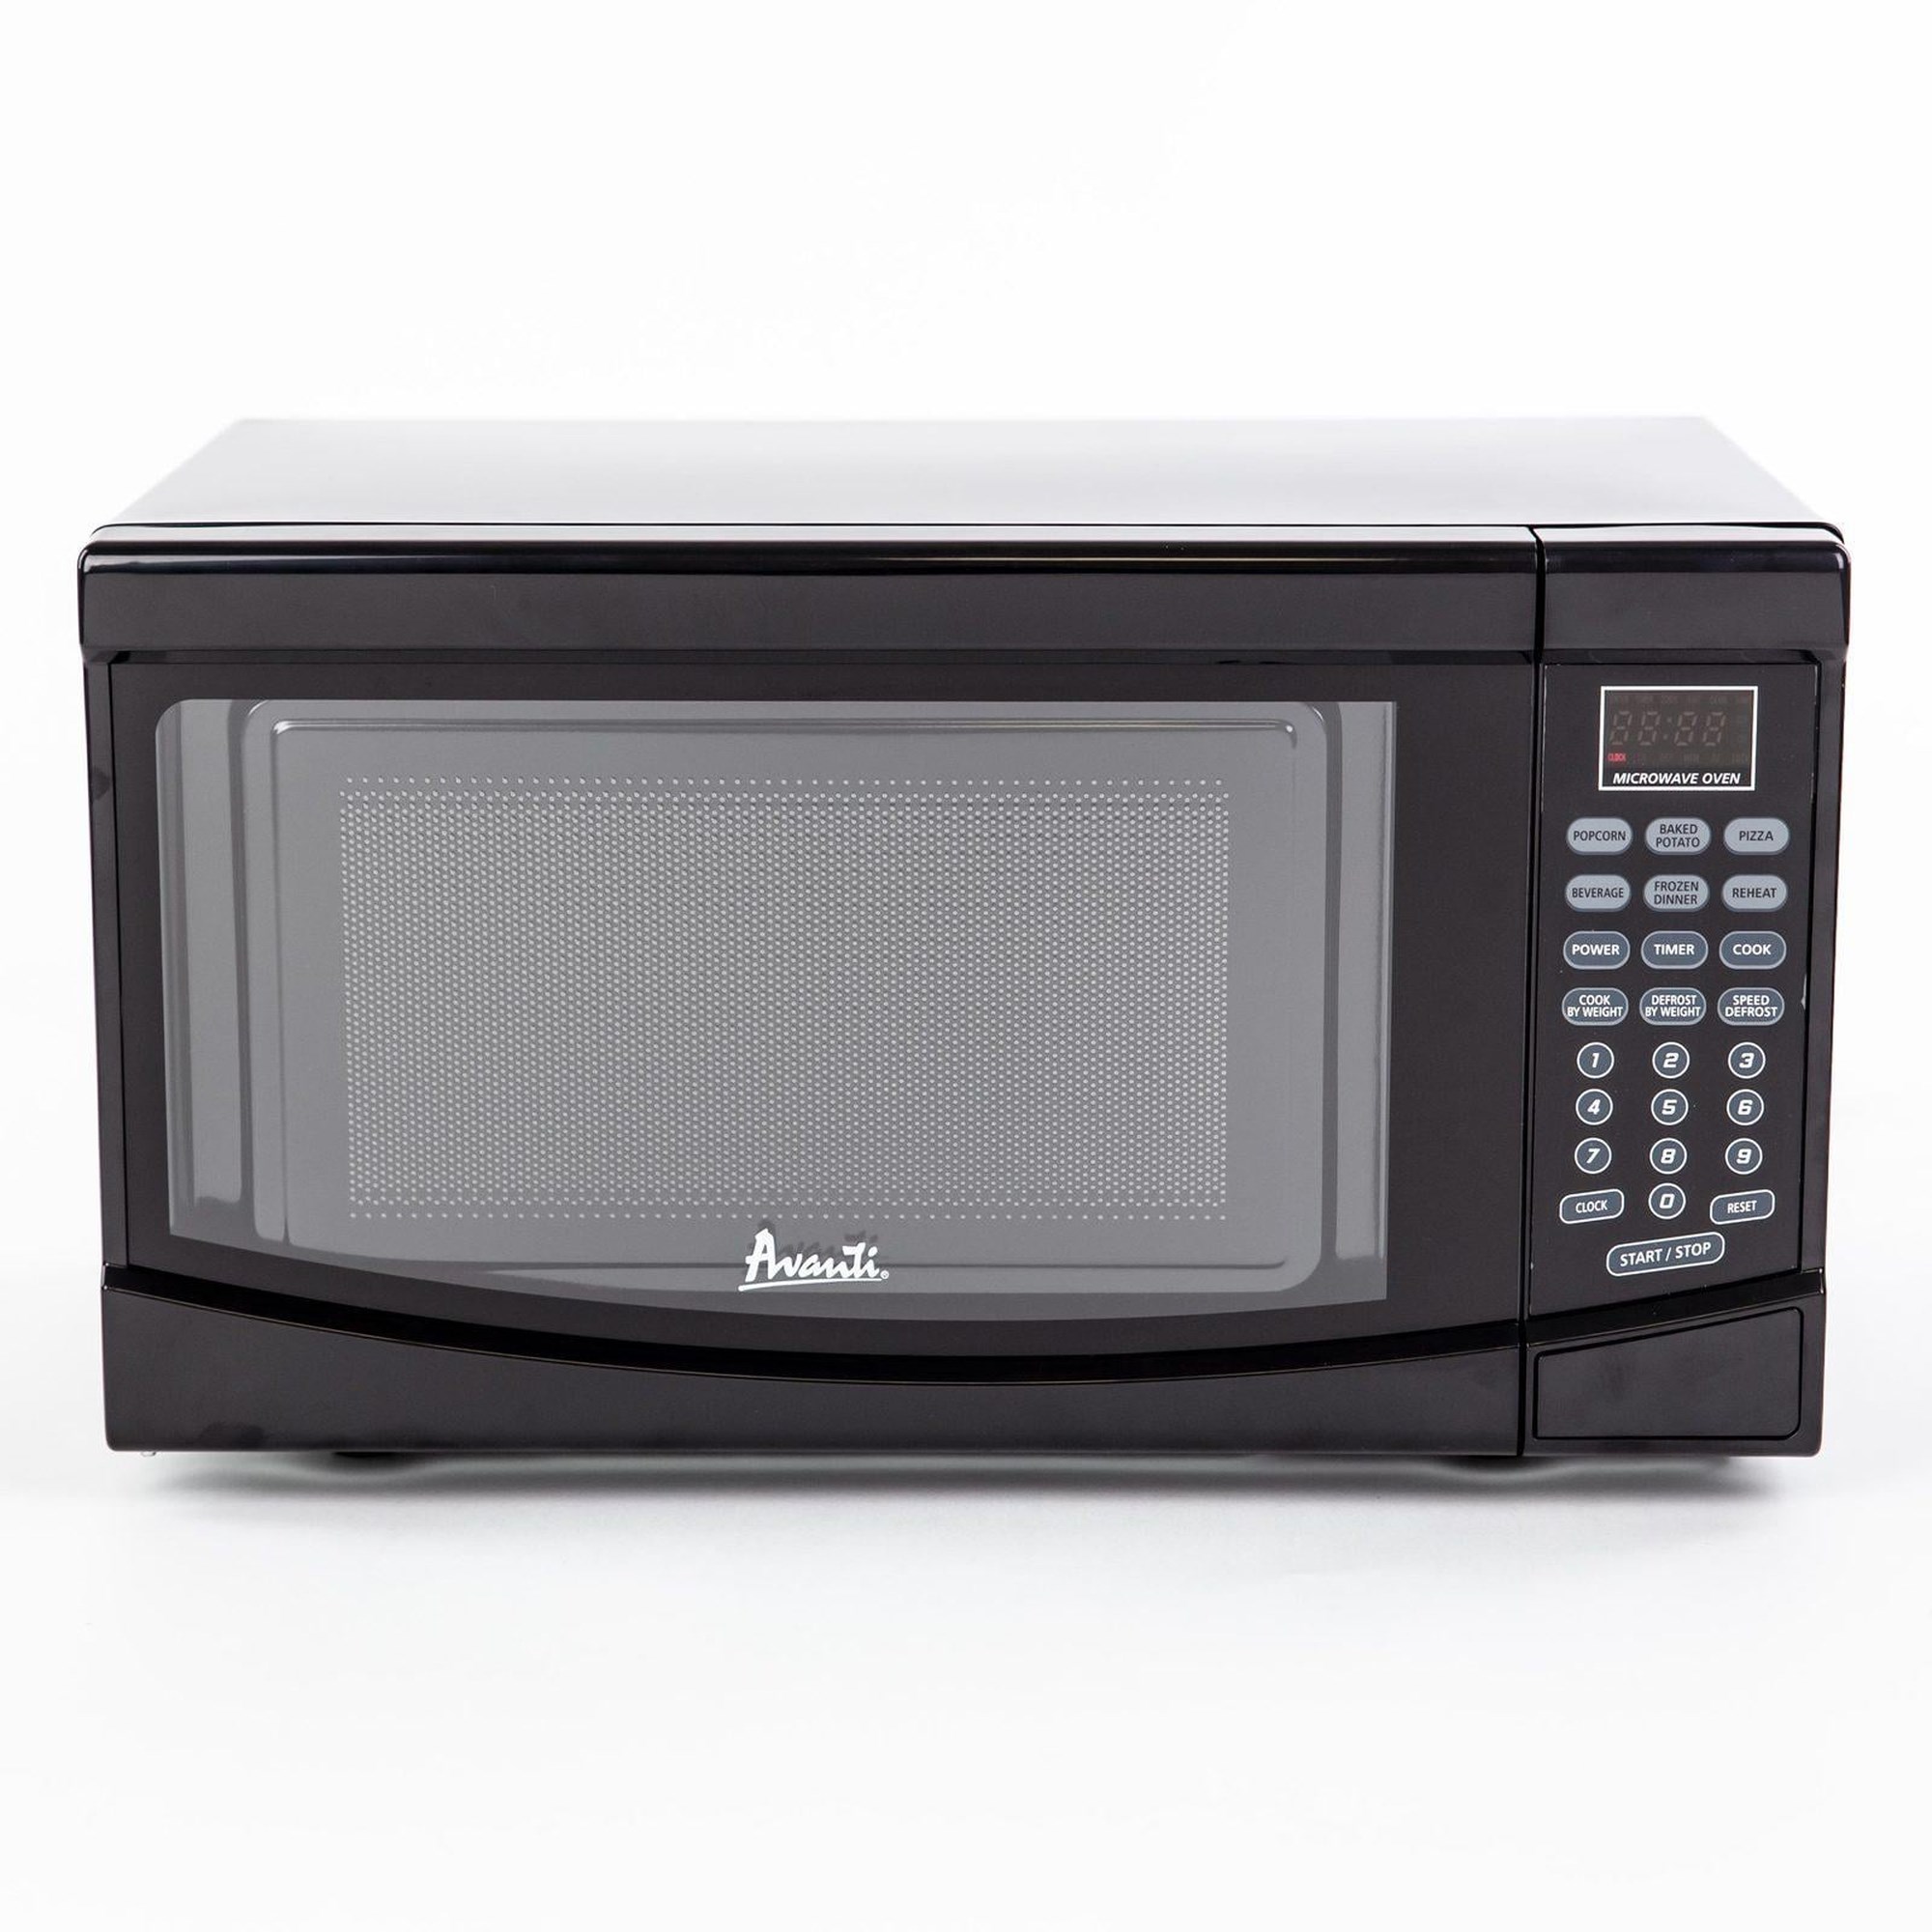 MT7V3S by Avanti - 0.7 cu. ft. Microwave Oven